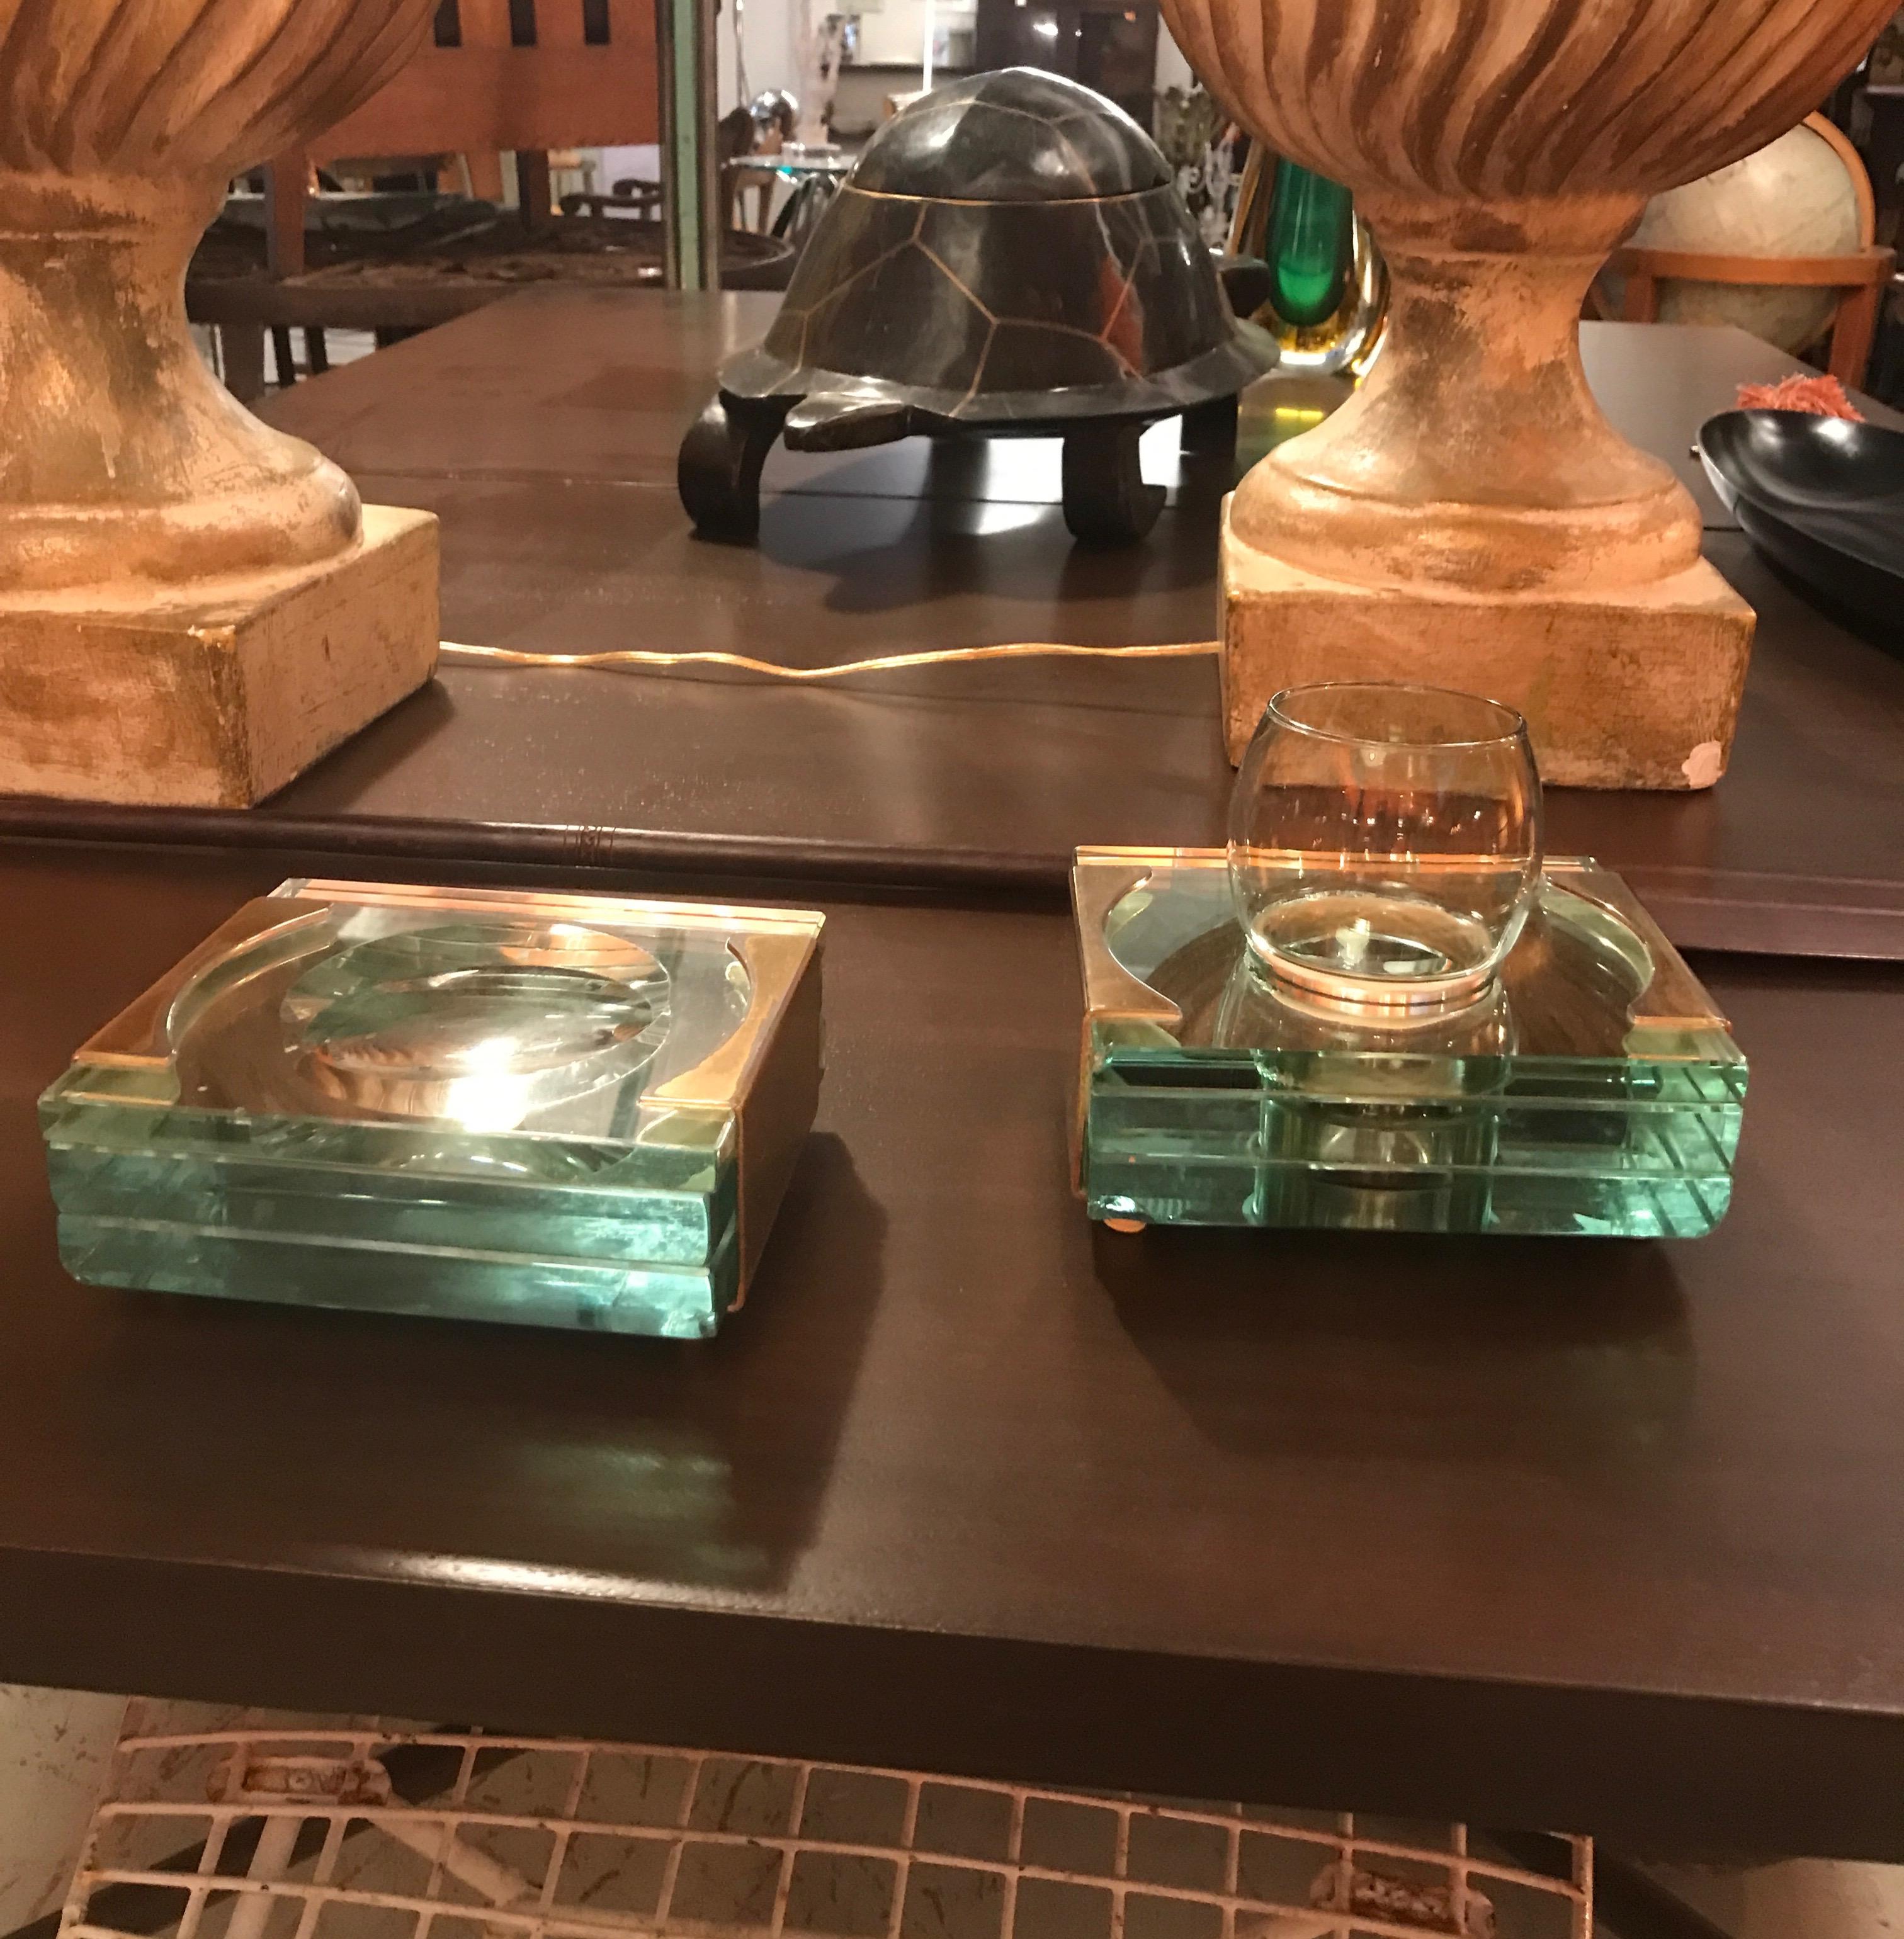 A three piece 1950’s Italian green glass and brass toned bathroom set composed of a cop holder with original smoked charcoal colored glass cup with original protective cloth band, and a convex mirrored stand for tools brushes tweezers etc attributed